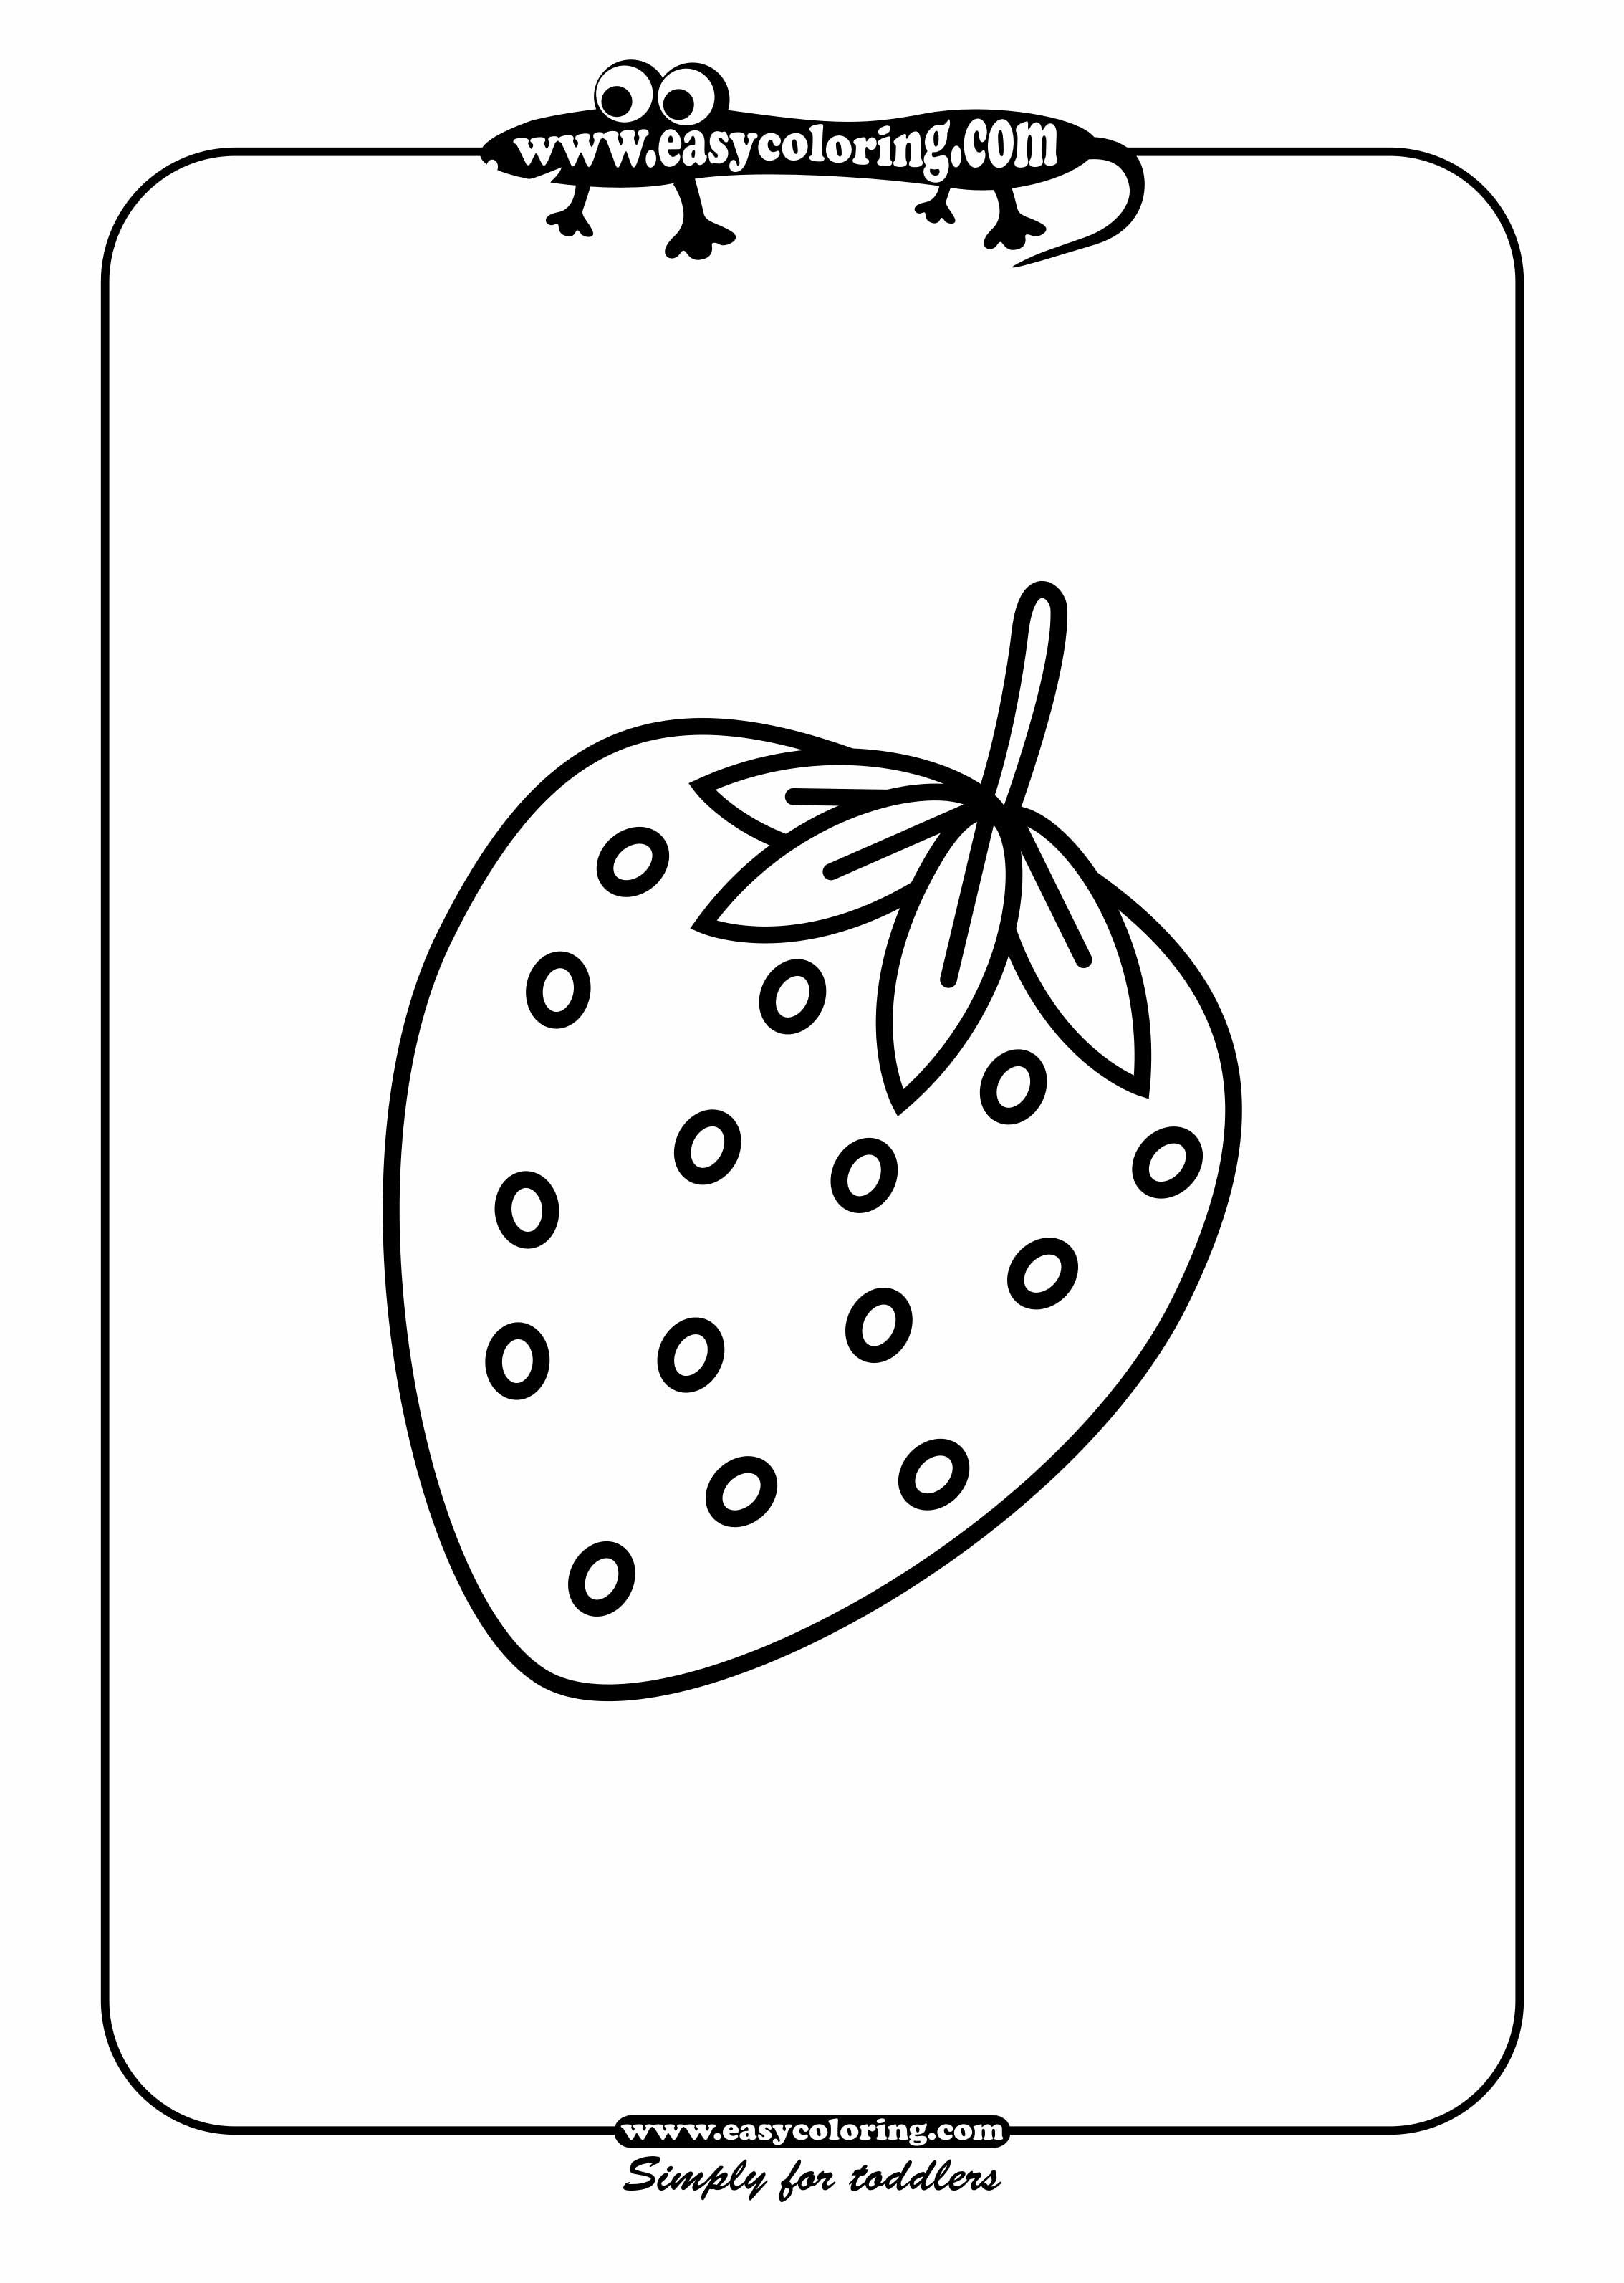 Download Shapes Coloring Pages For Kindergarten at GetDrawings.com | Free for personal use Shapes ...